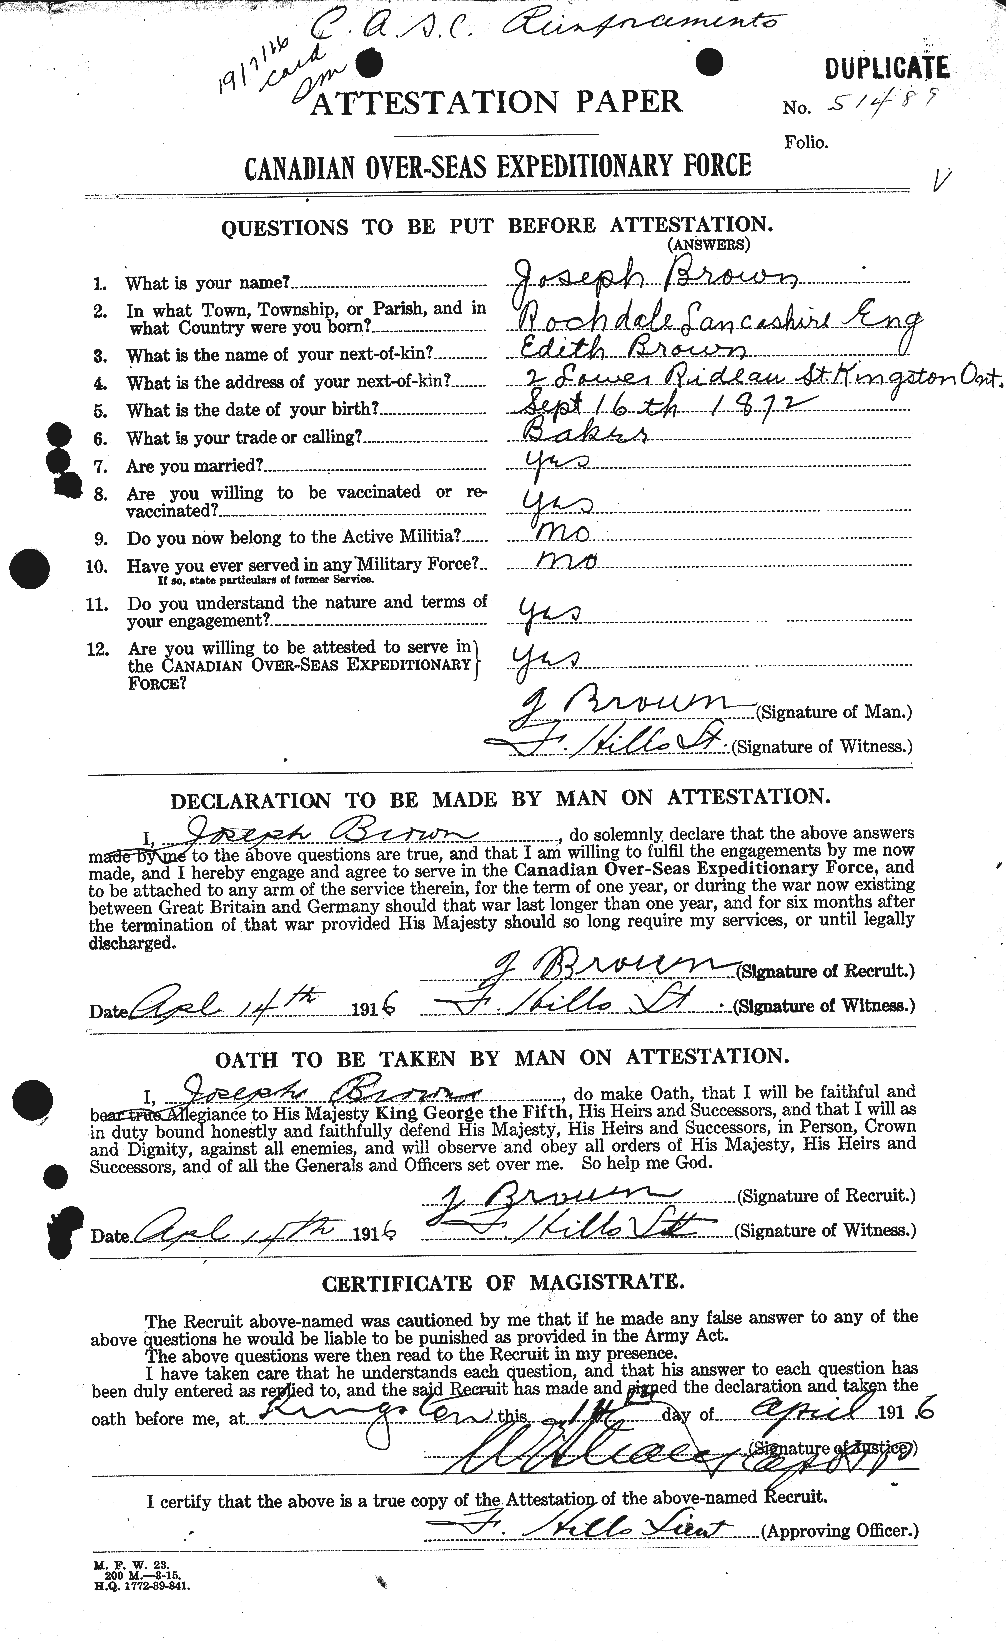 Personnel Records of the First World War - CEF 265929a